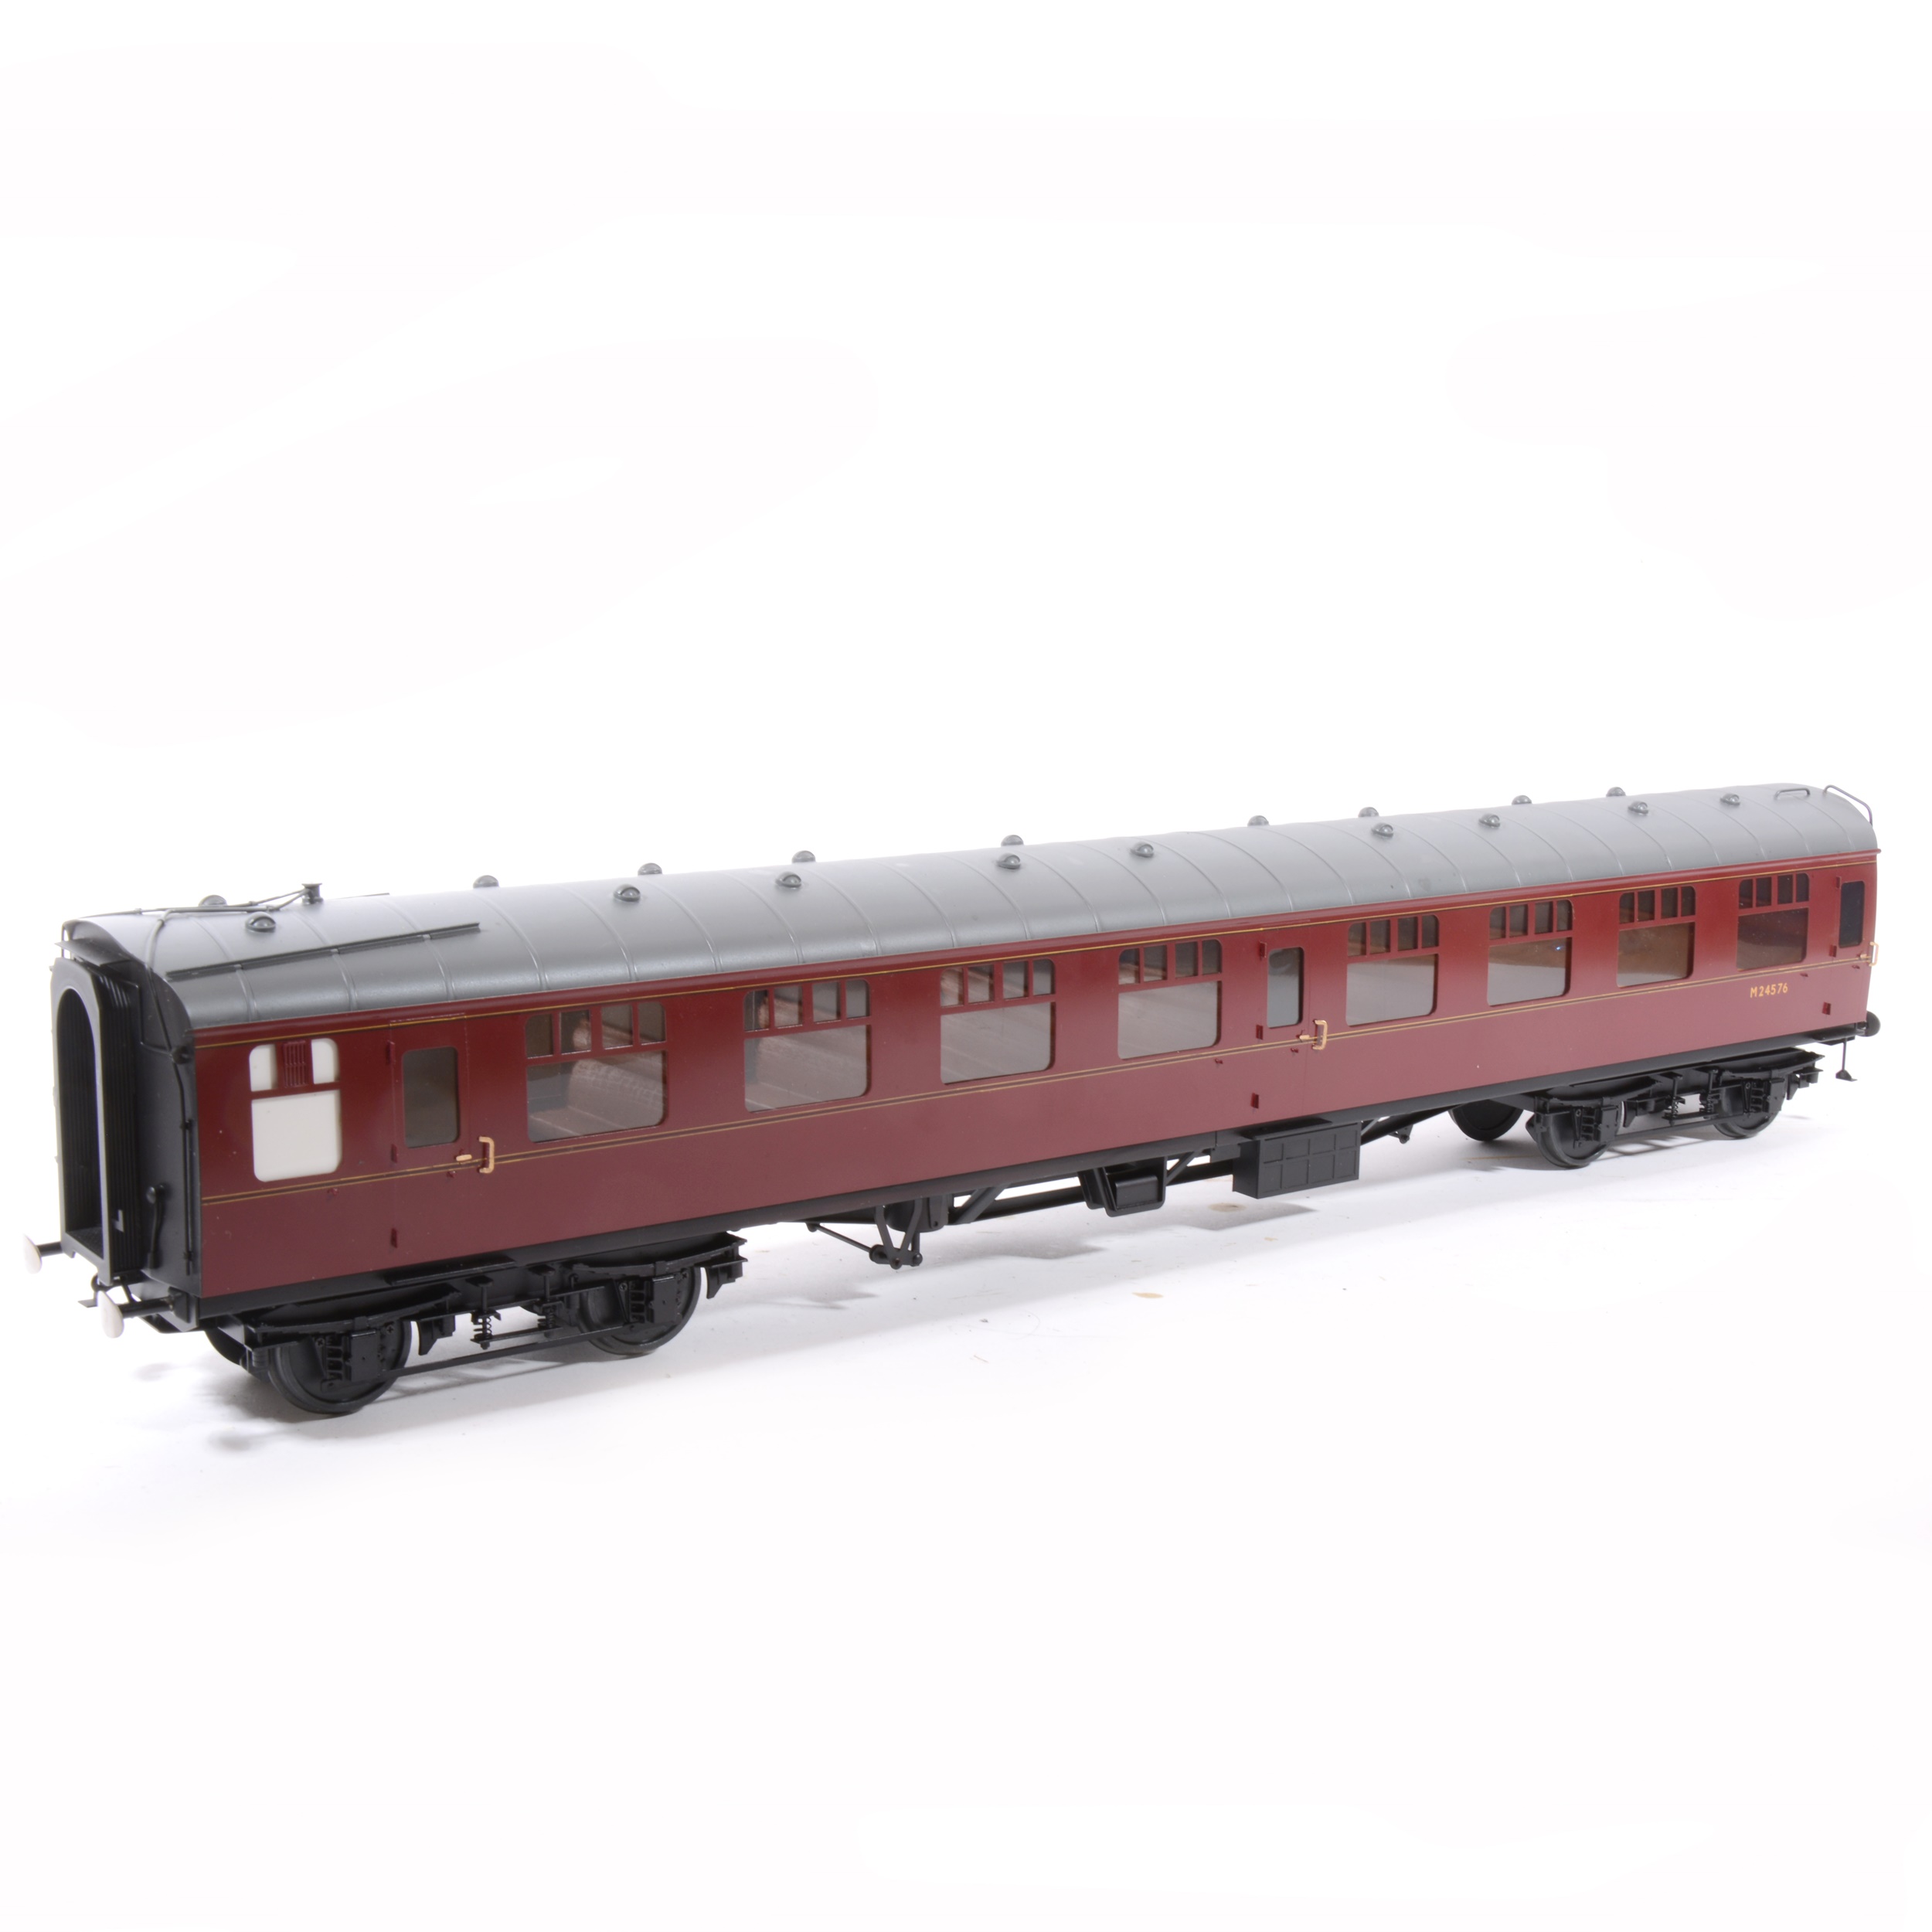 Tower Brass Models, gauge 1 / G scale, 45mm passenger coach, BR maroon no.M25476, boxed. - Image 2 of 2